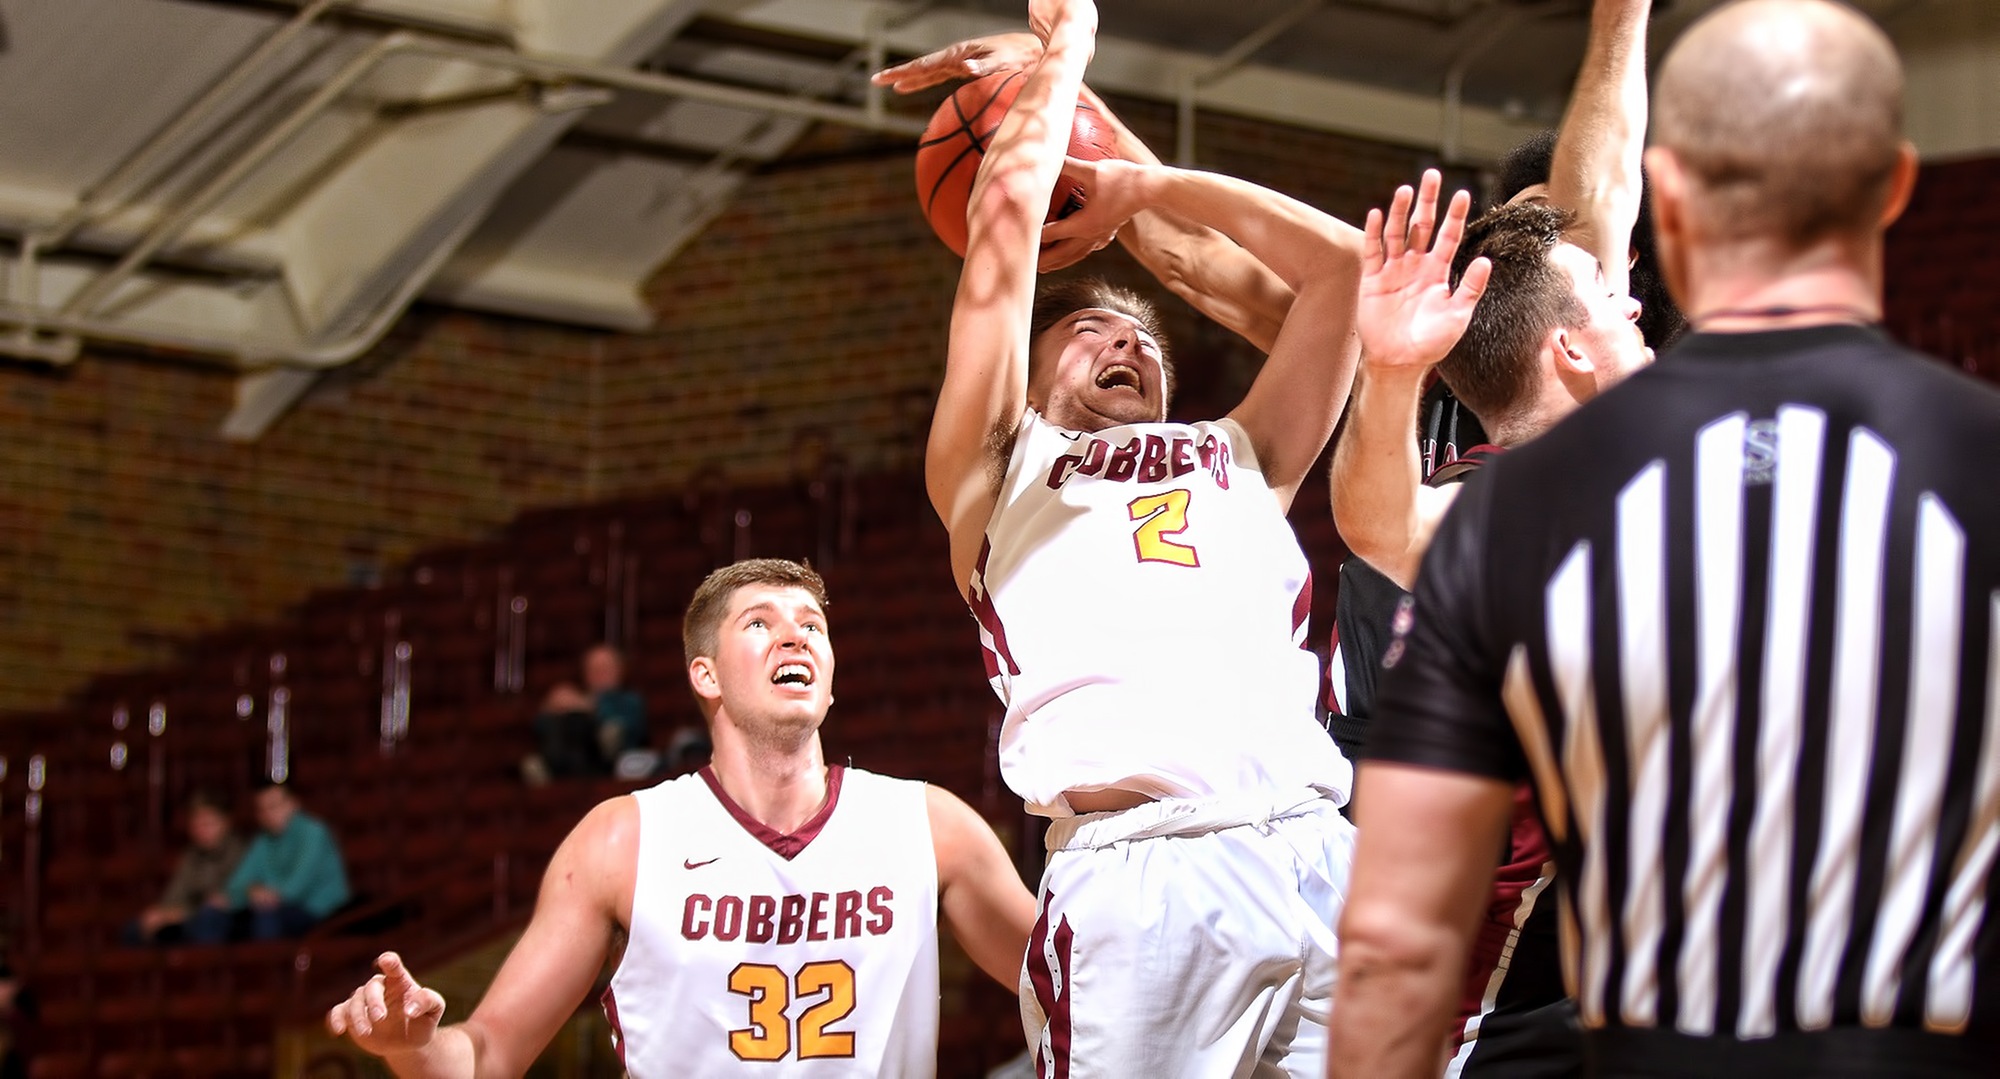 Junior Bryde Urie gets fouled on the way to the basket in the second half of the Cobbers' game with Hamline. Urie tied his career high with 25 points.